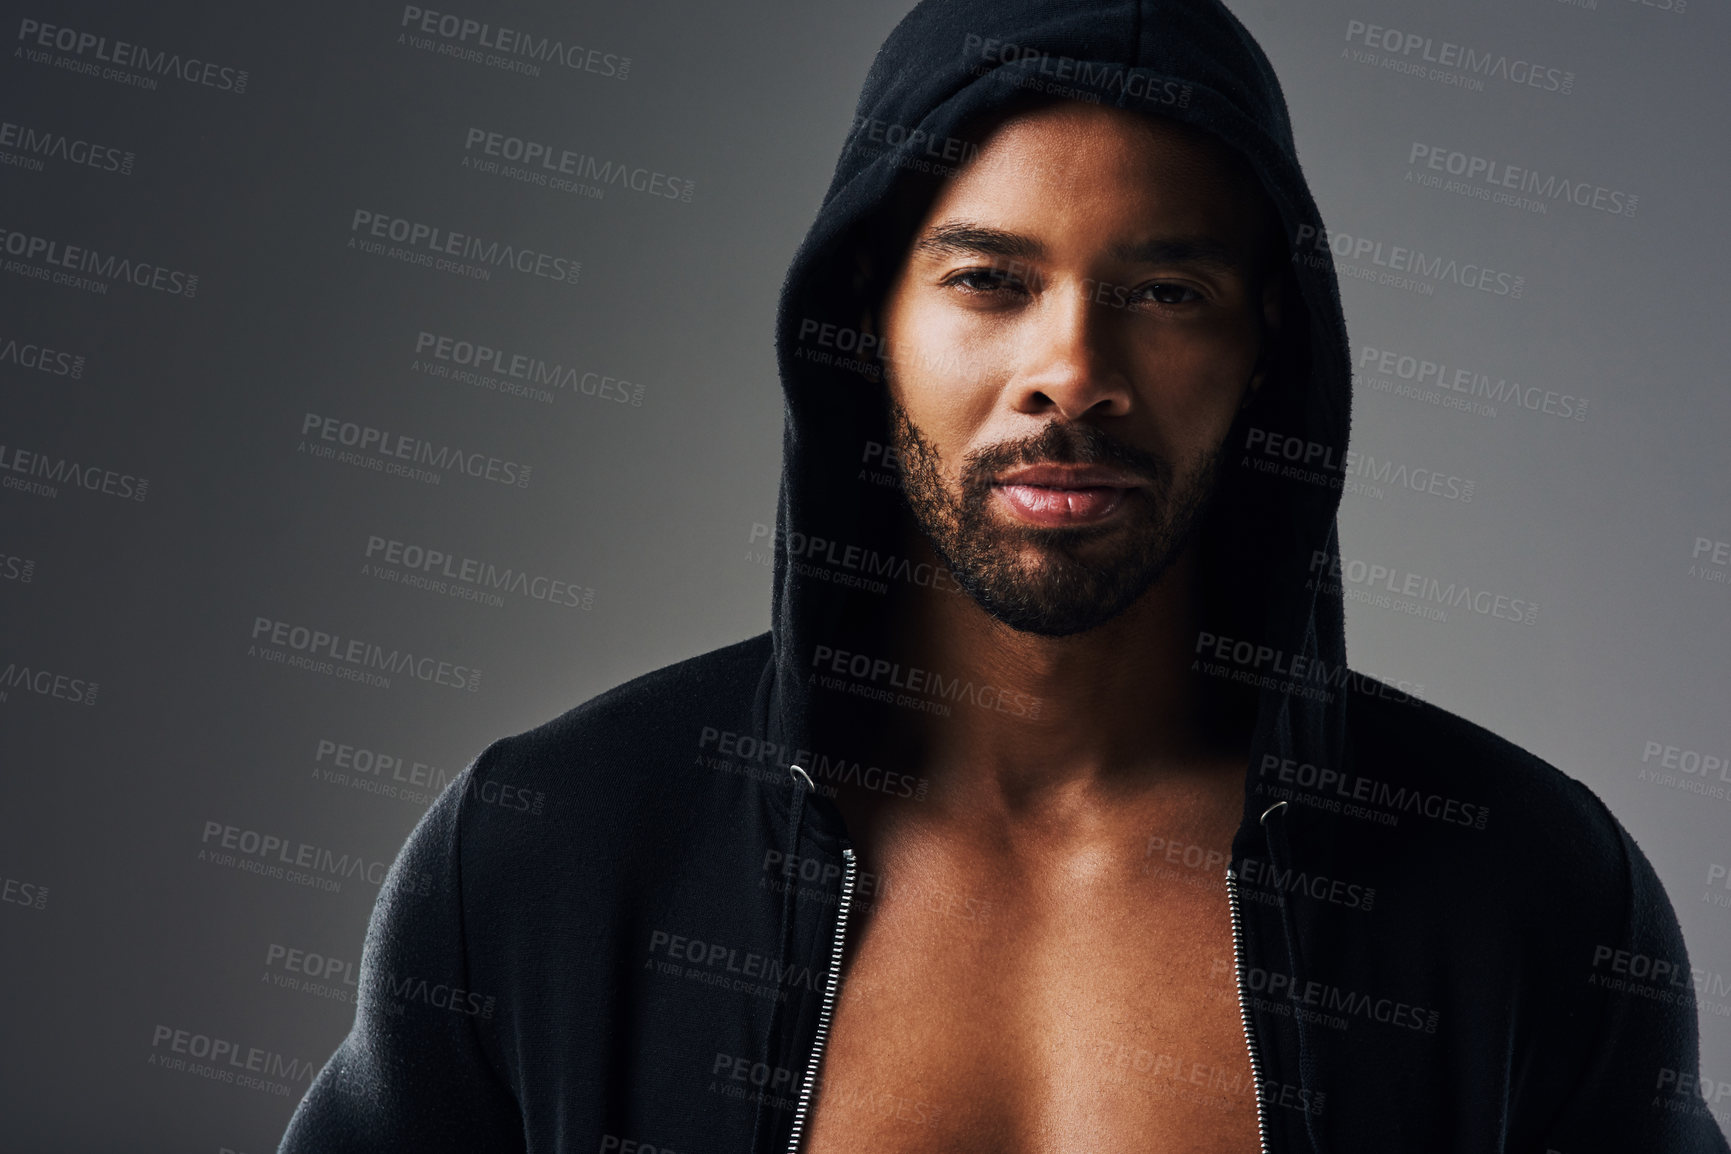 Buy stock photo Portrait of a handsome young man wearing a hoodie posing against a grey background